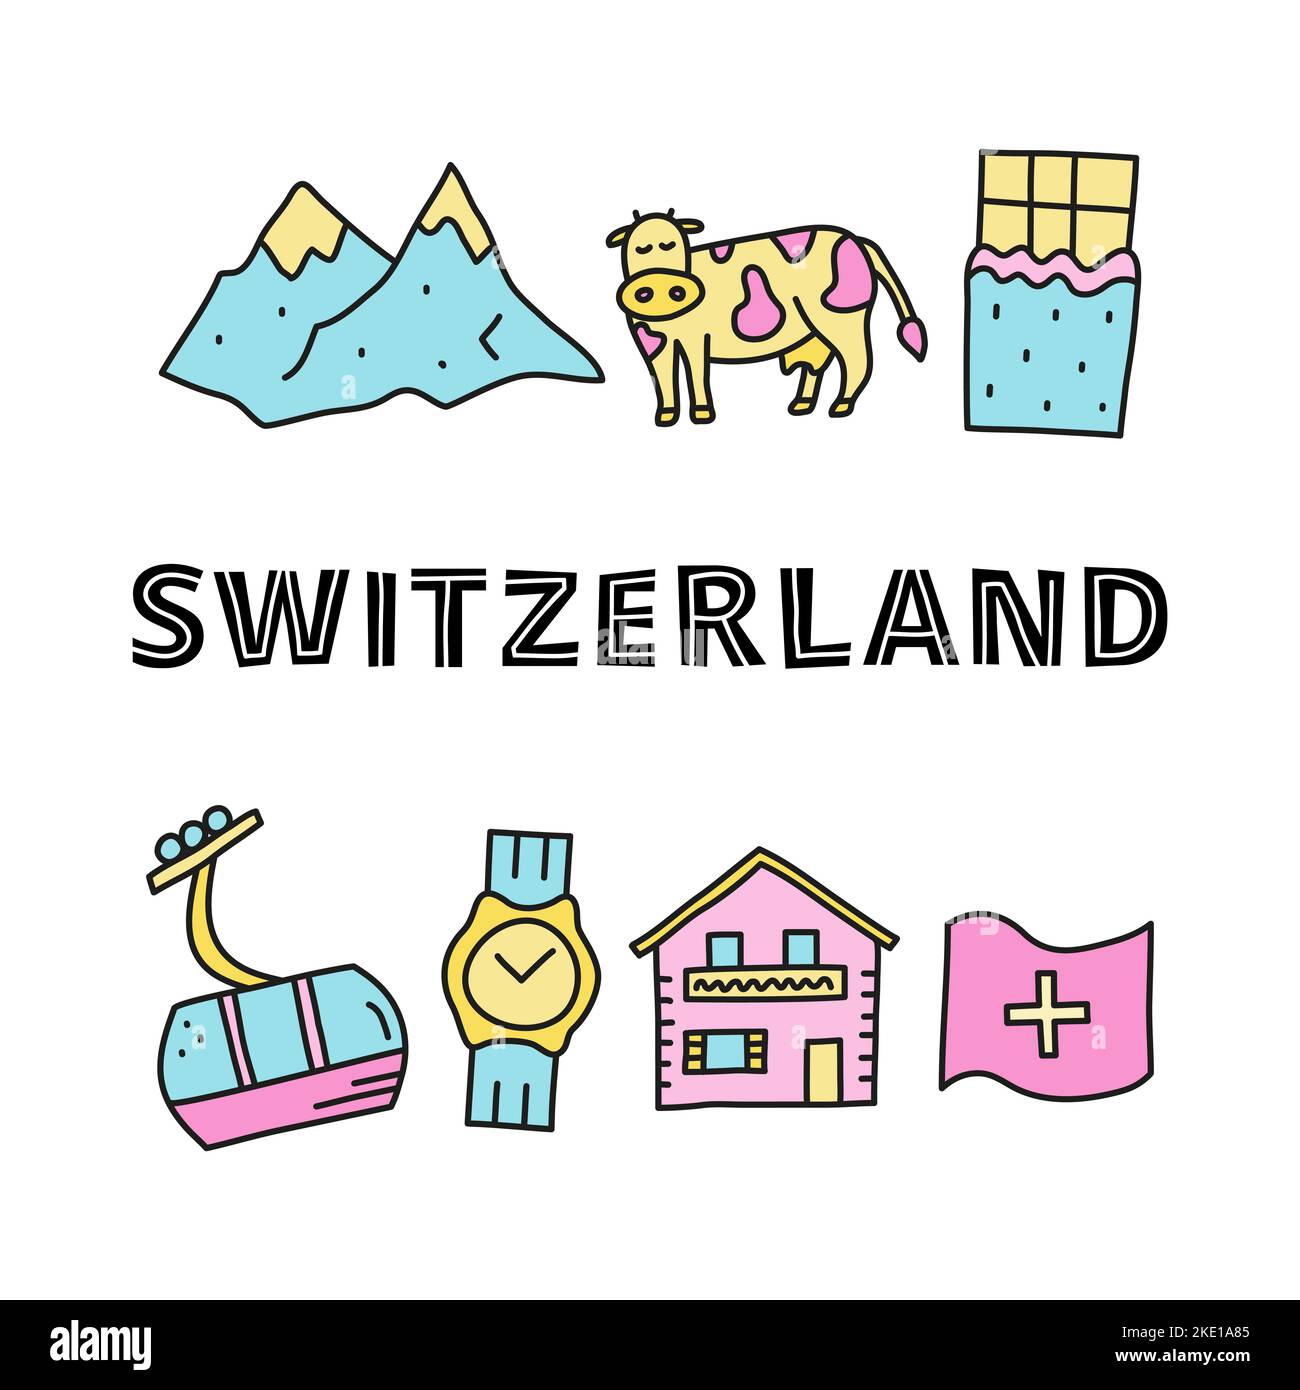 Poster with doodle colored Switzerland travel icons including chocolate, cable car, cow, Alpine mountains, house chalet, wrist watch, flag and letteri Stock Vector